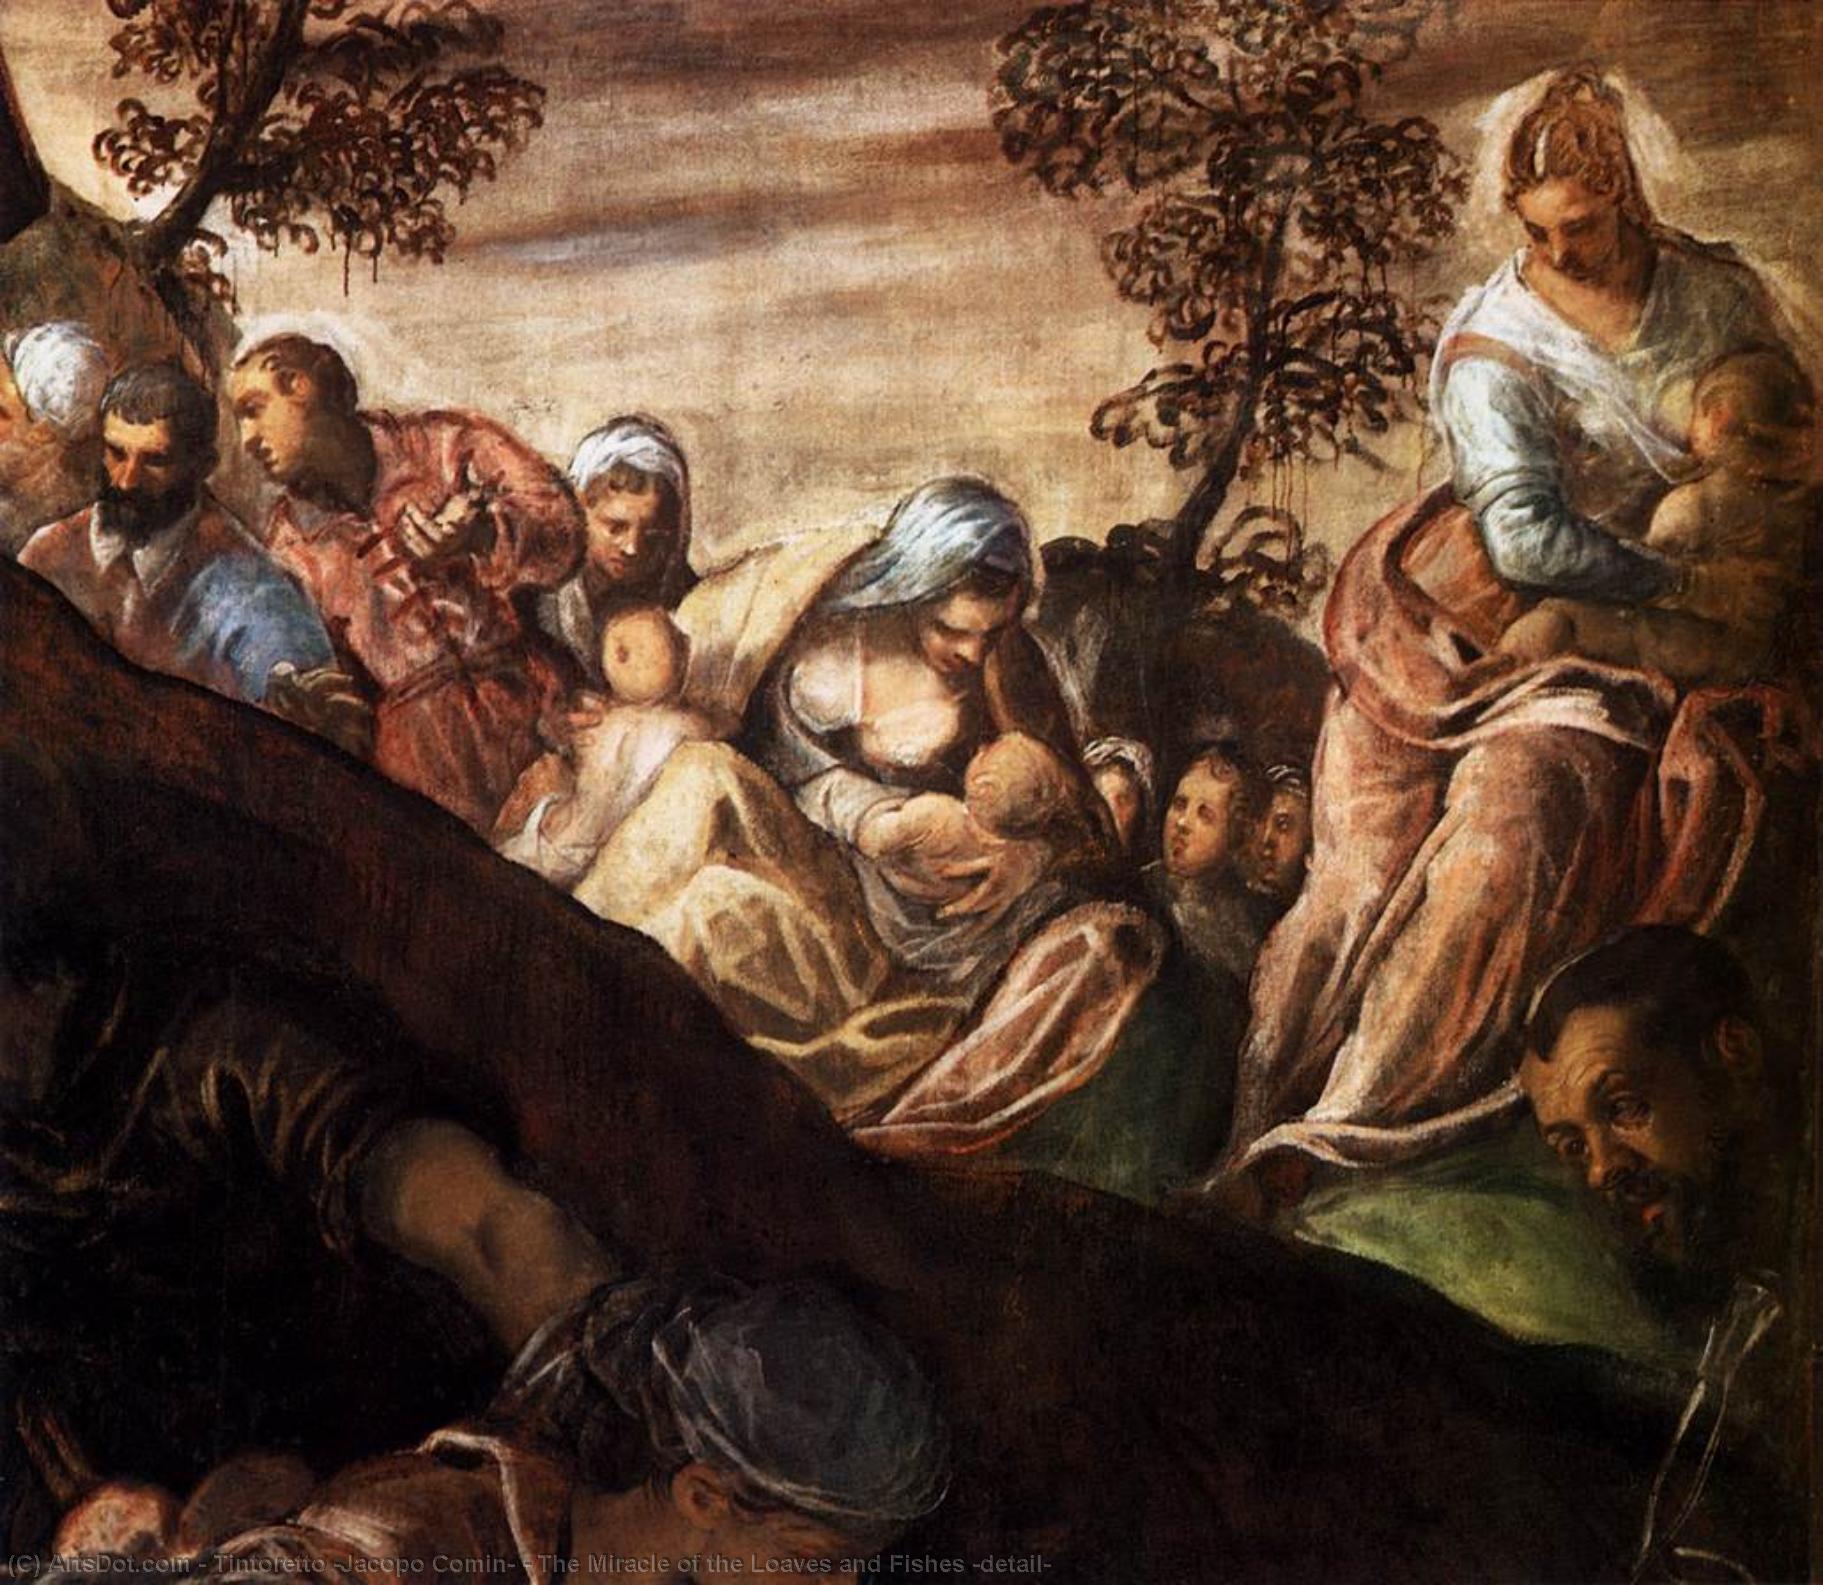 WikiOO.org - Güzel Sanatlar Ansiklopedisi - Resim, Resimler Tintoretto (Jacopo Comin) - The Miracle of the Loaves and Fishes (detail)